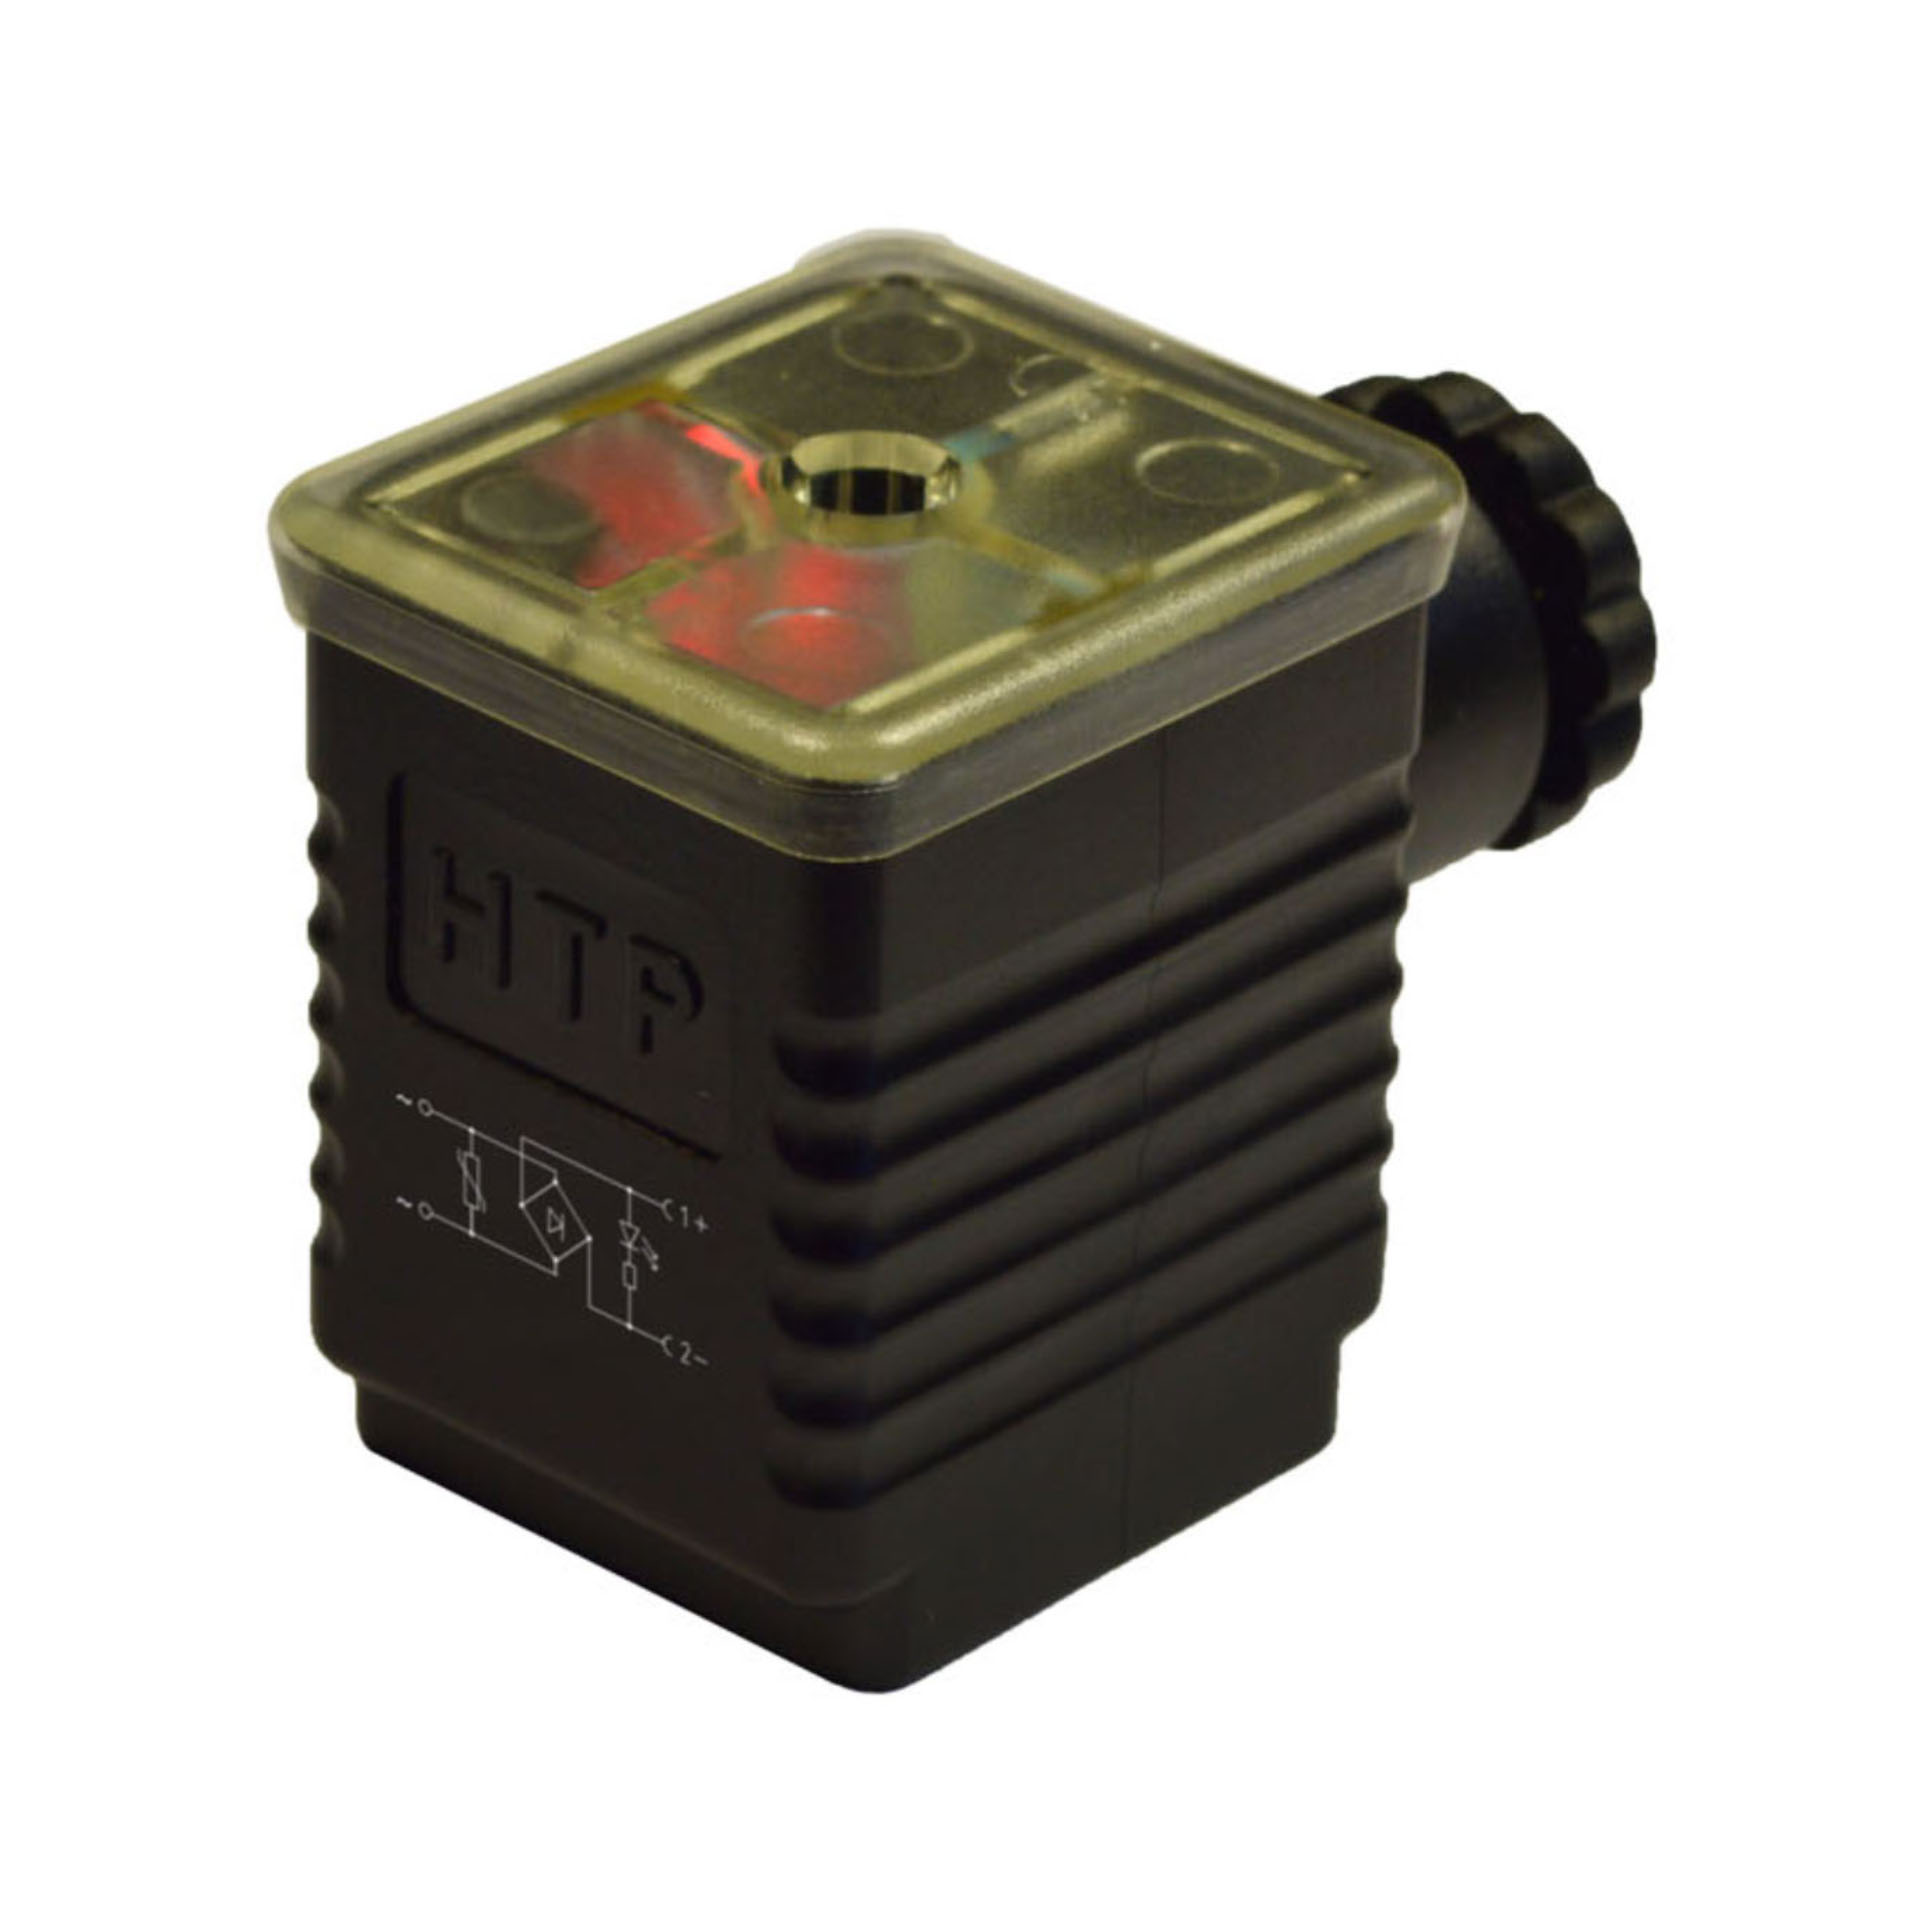 DIN connector 43650/A - special type 4 -housing black and transp.cover with bridge rec.+redled+var.